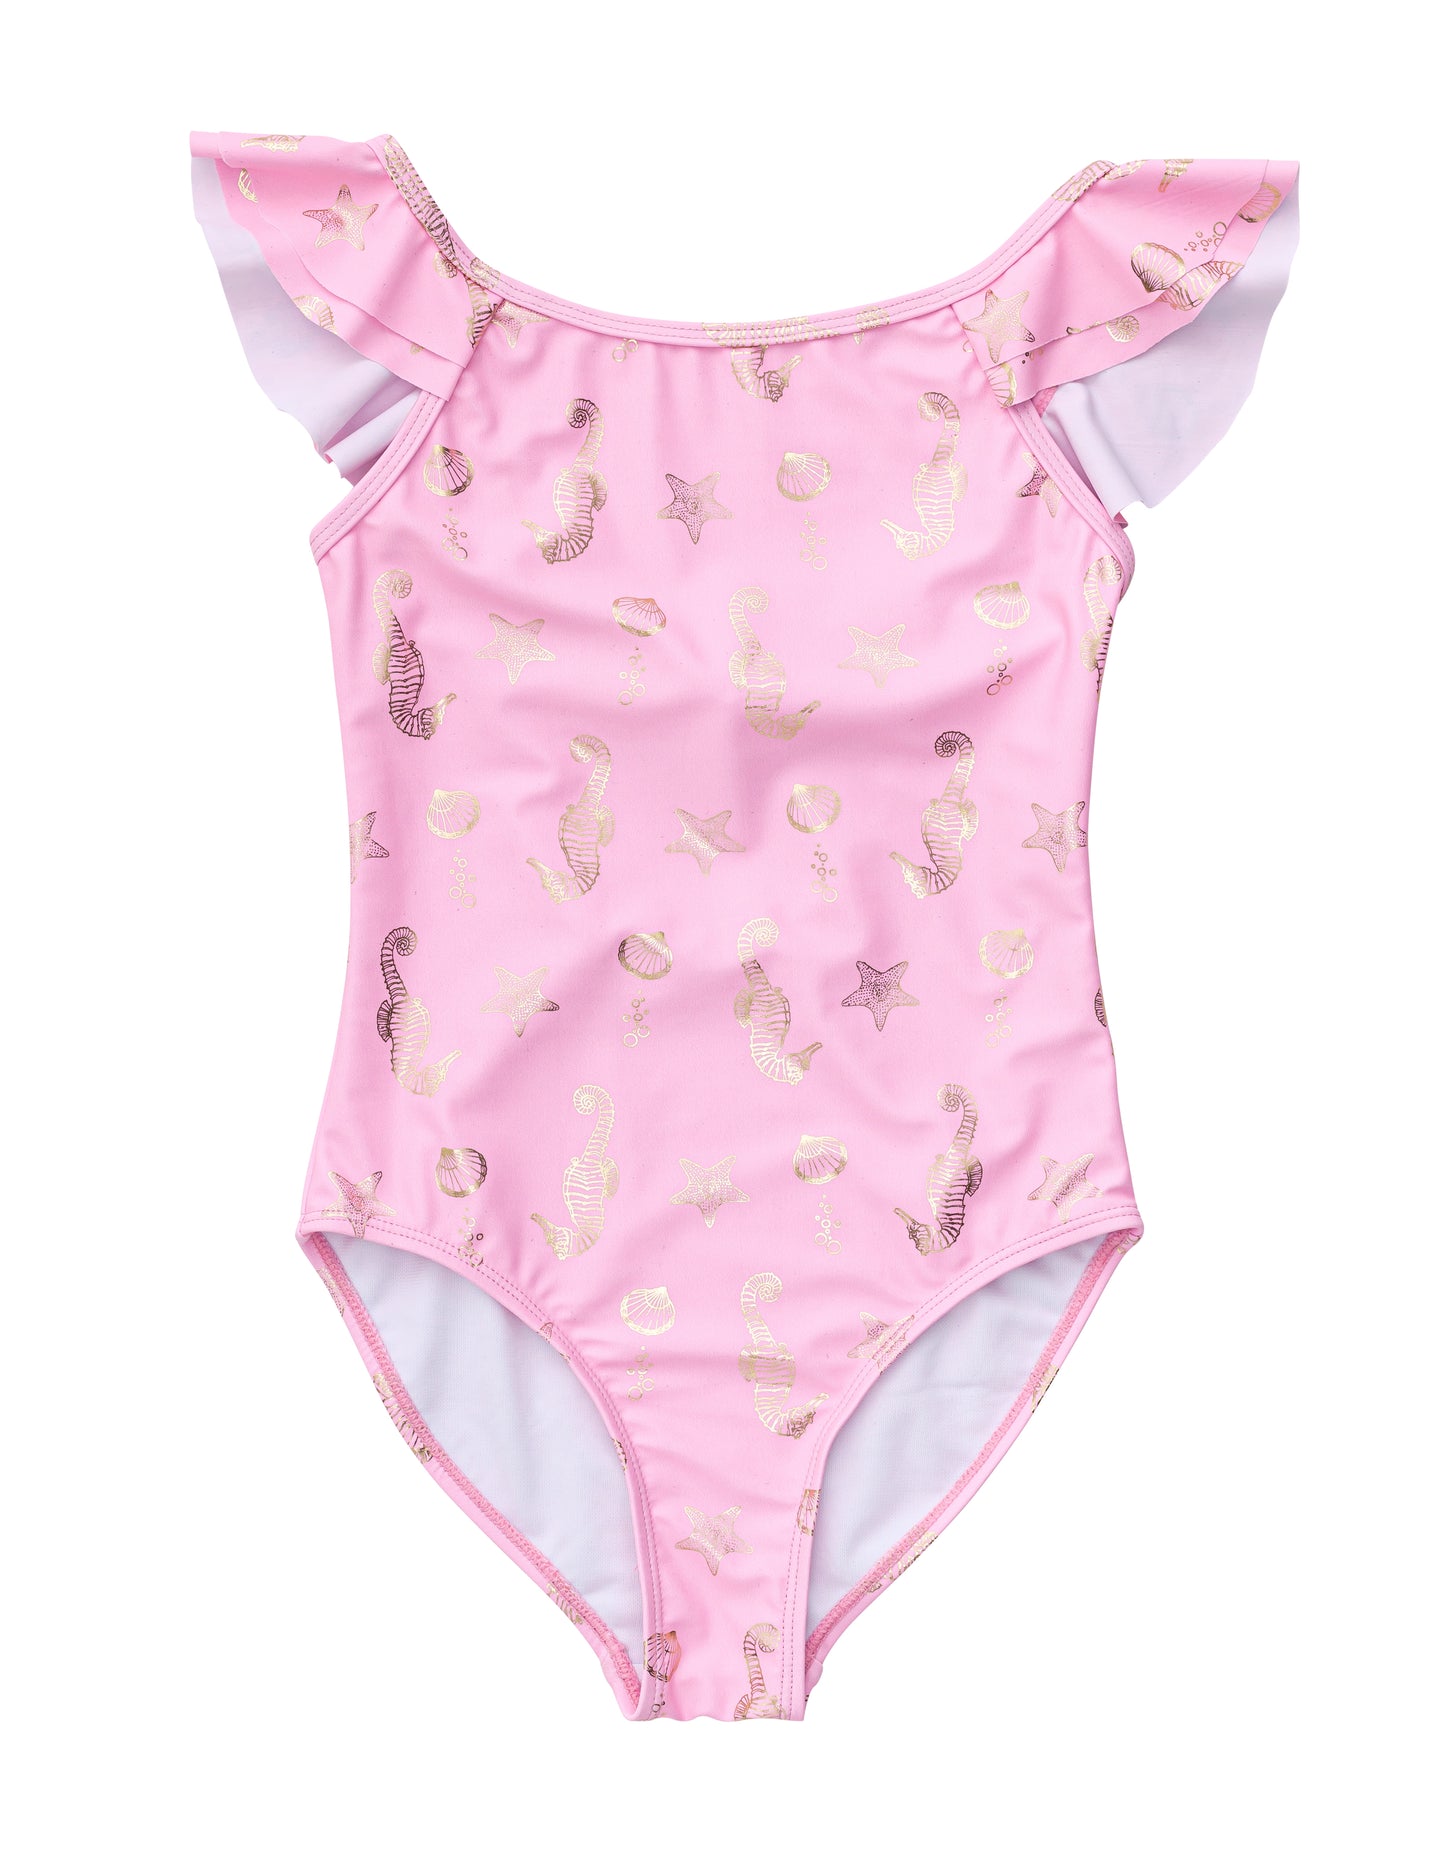 Seahorse Sparkle Flutter Swimsuit & Dotty Cover Up